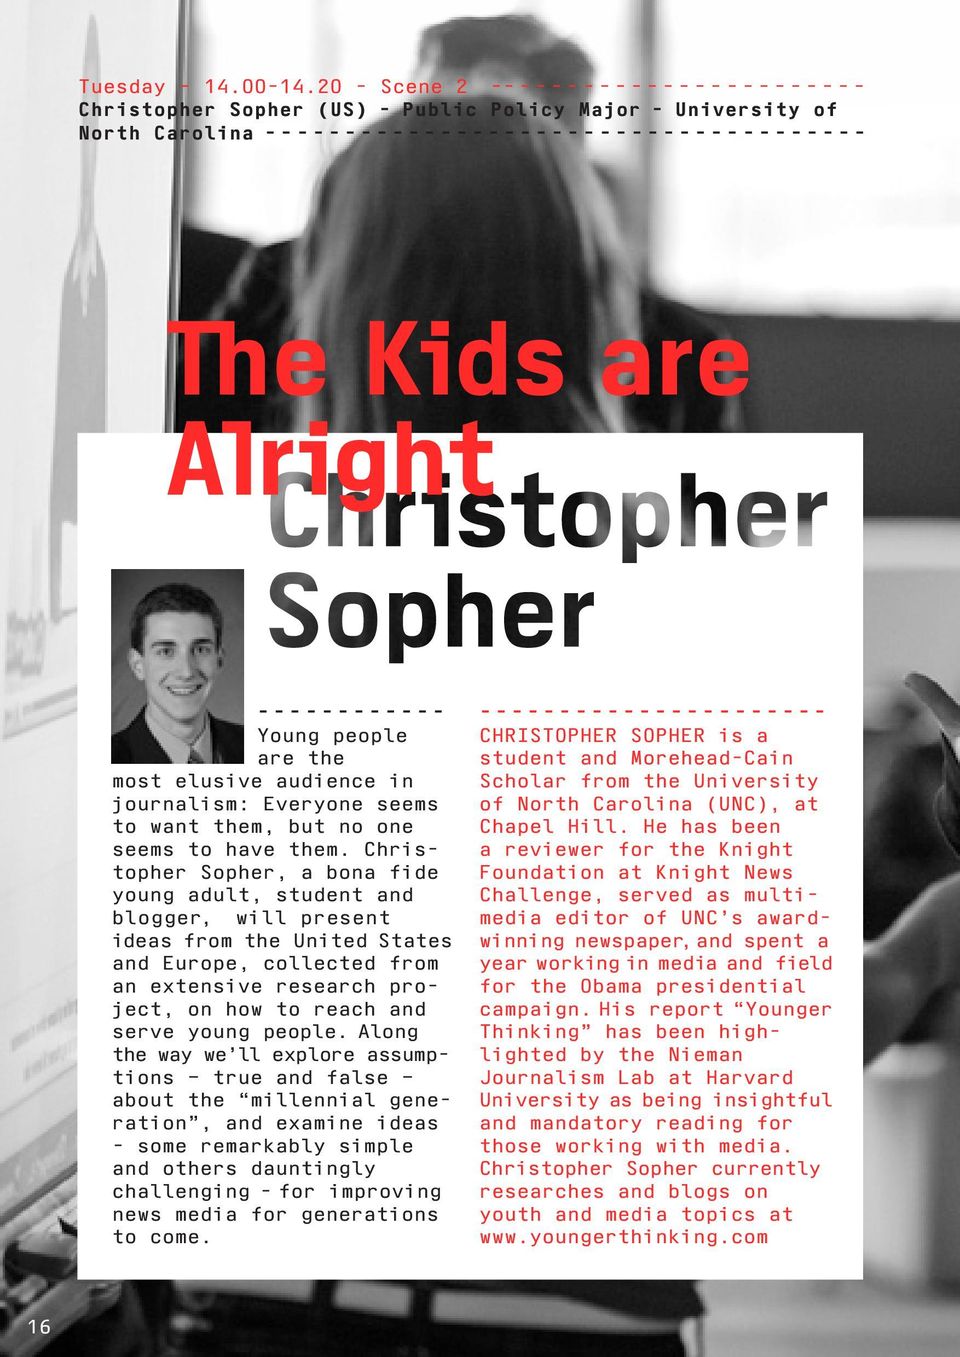 ---------------------- Young people Christopher Sopher is a are the student and Morehead-Cain most elusive audience in Scholar from the University journalism: Everyone seems of North Carolina (UNC),